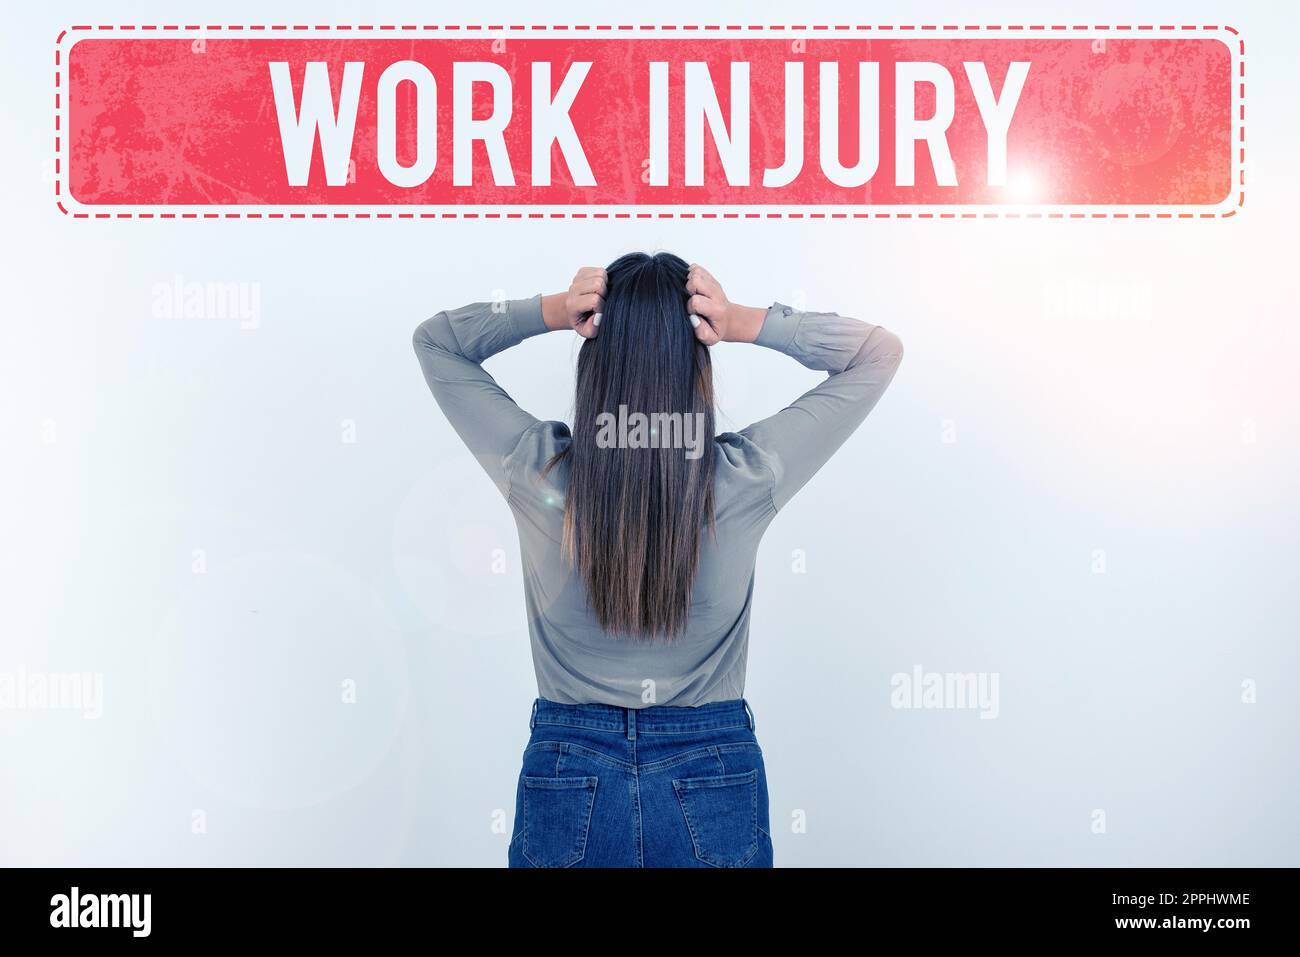 Sign displaying Work Injury. Business idea Accident in job Danger Unsecure conditions Hurt Trauma Stock Photo